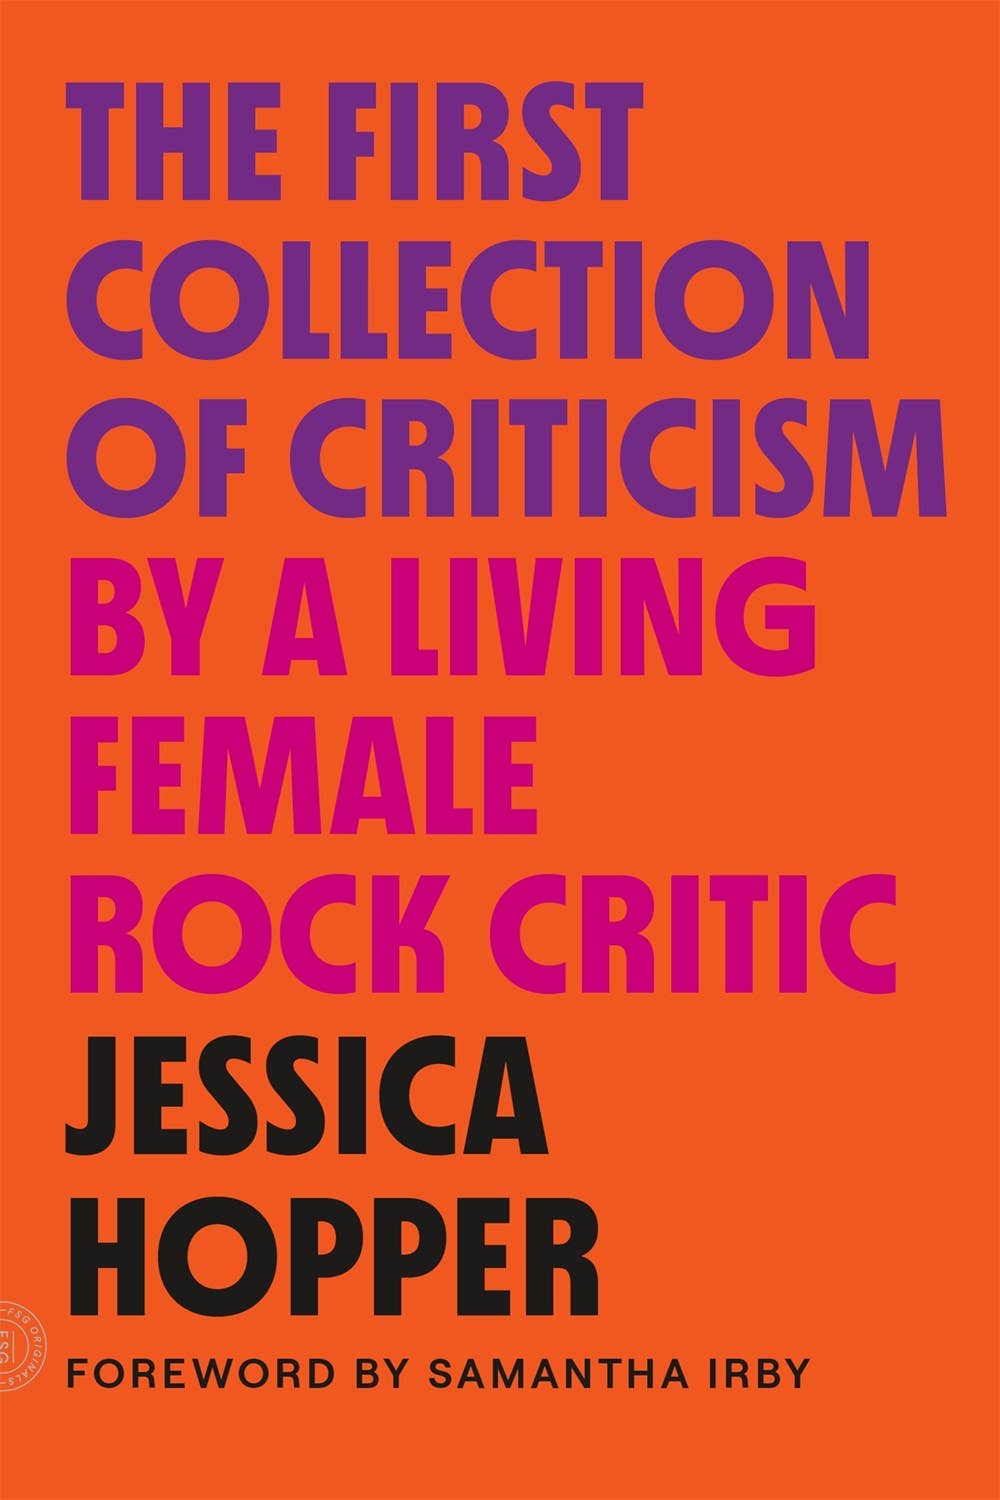 Books: First Collection of Criticism by a Living Female Rock Critic